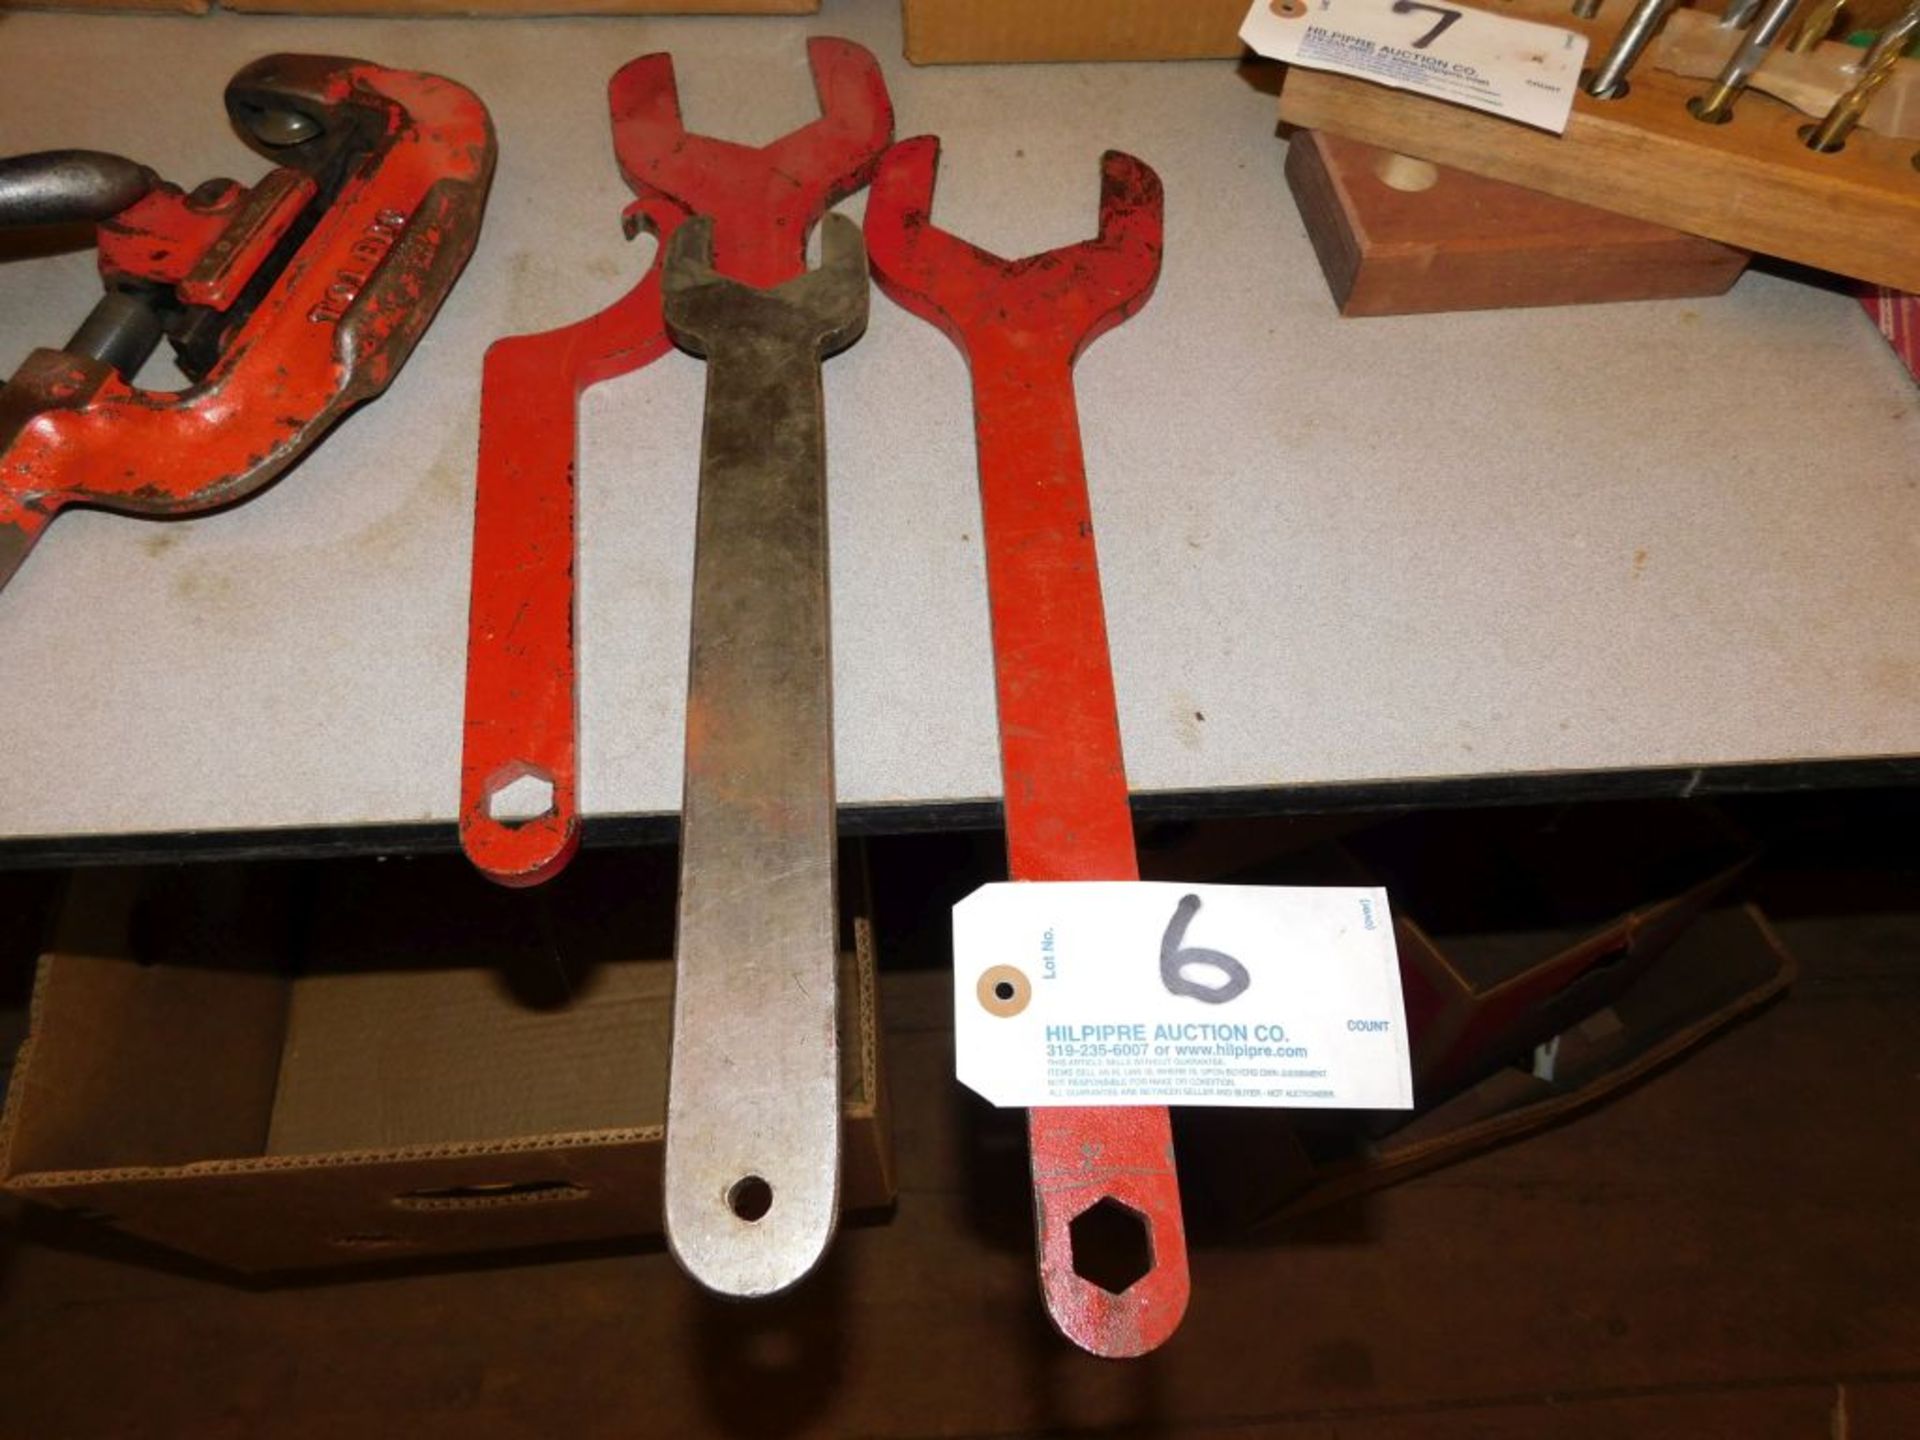 Machine wrenches, up to 2 1/2".